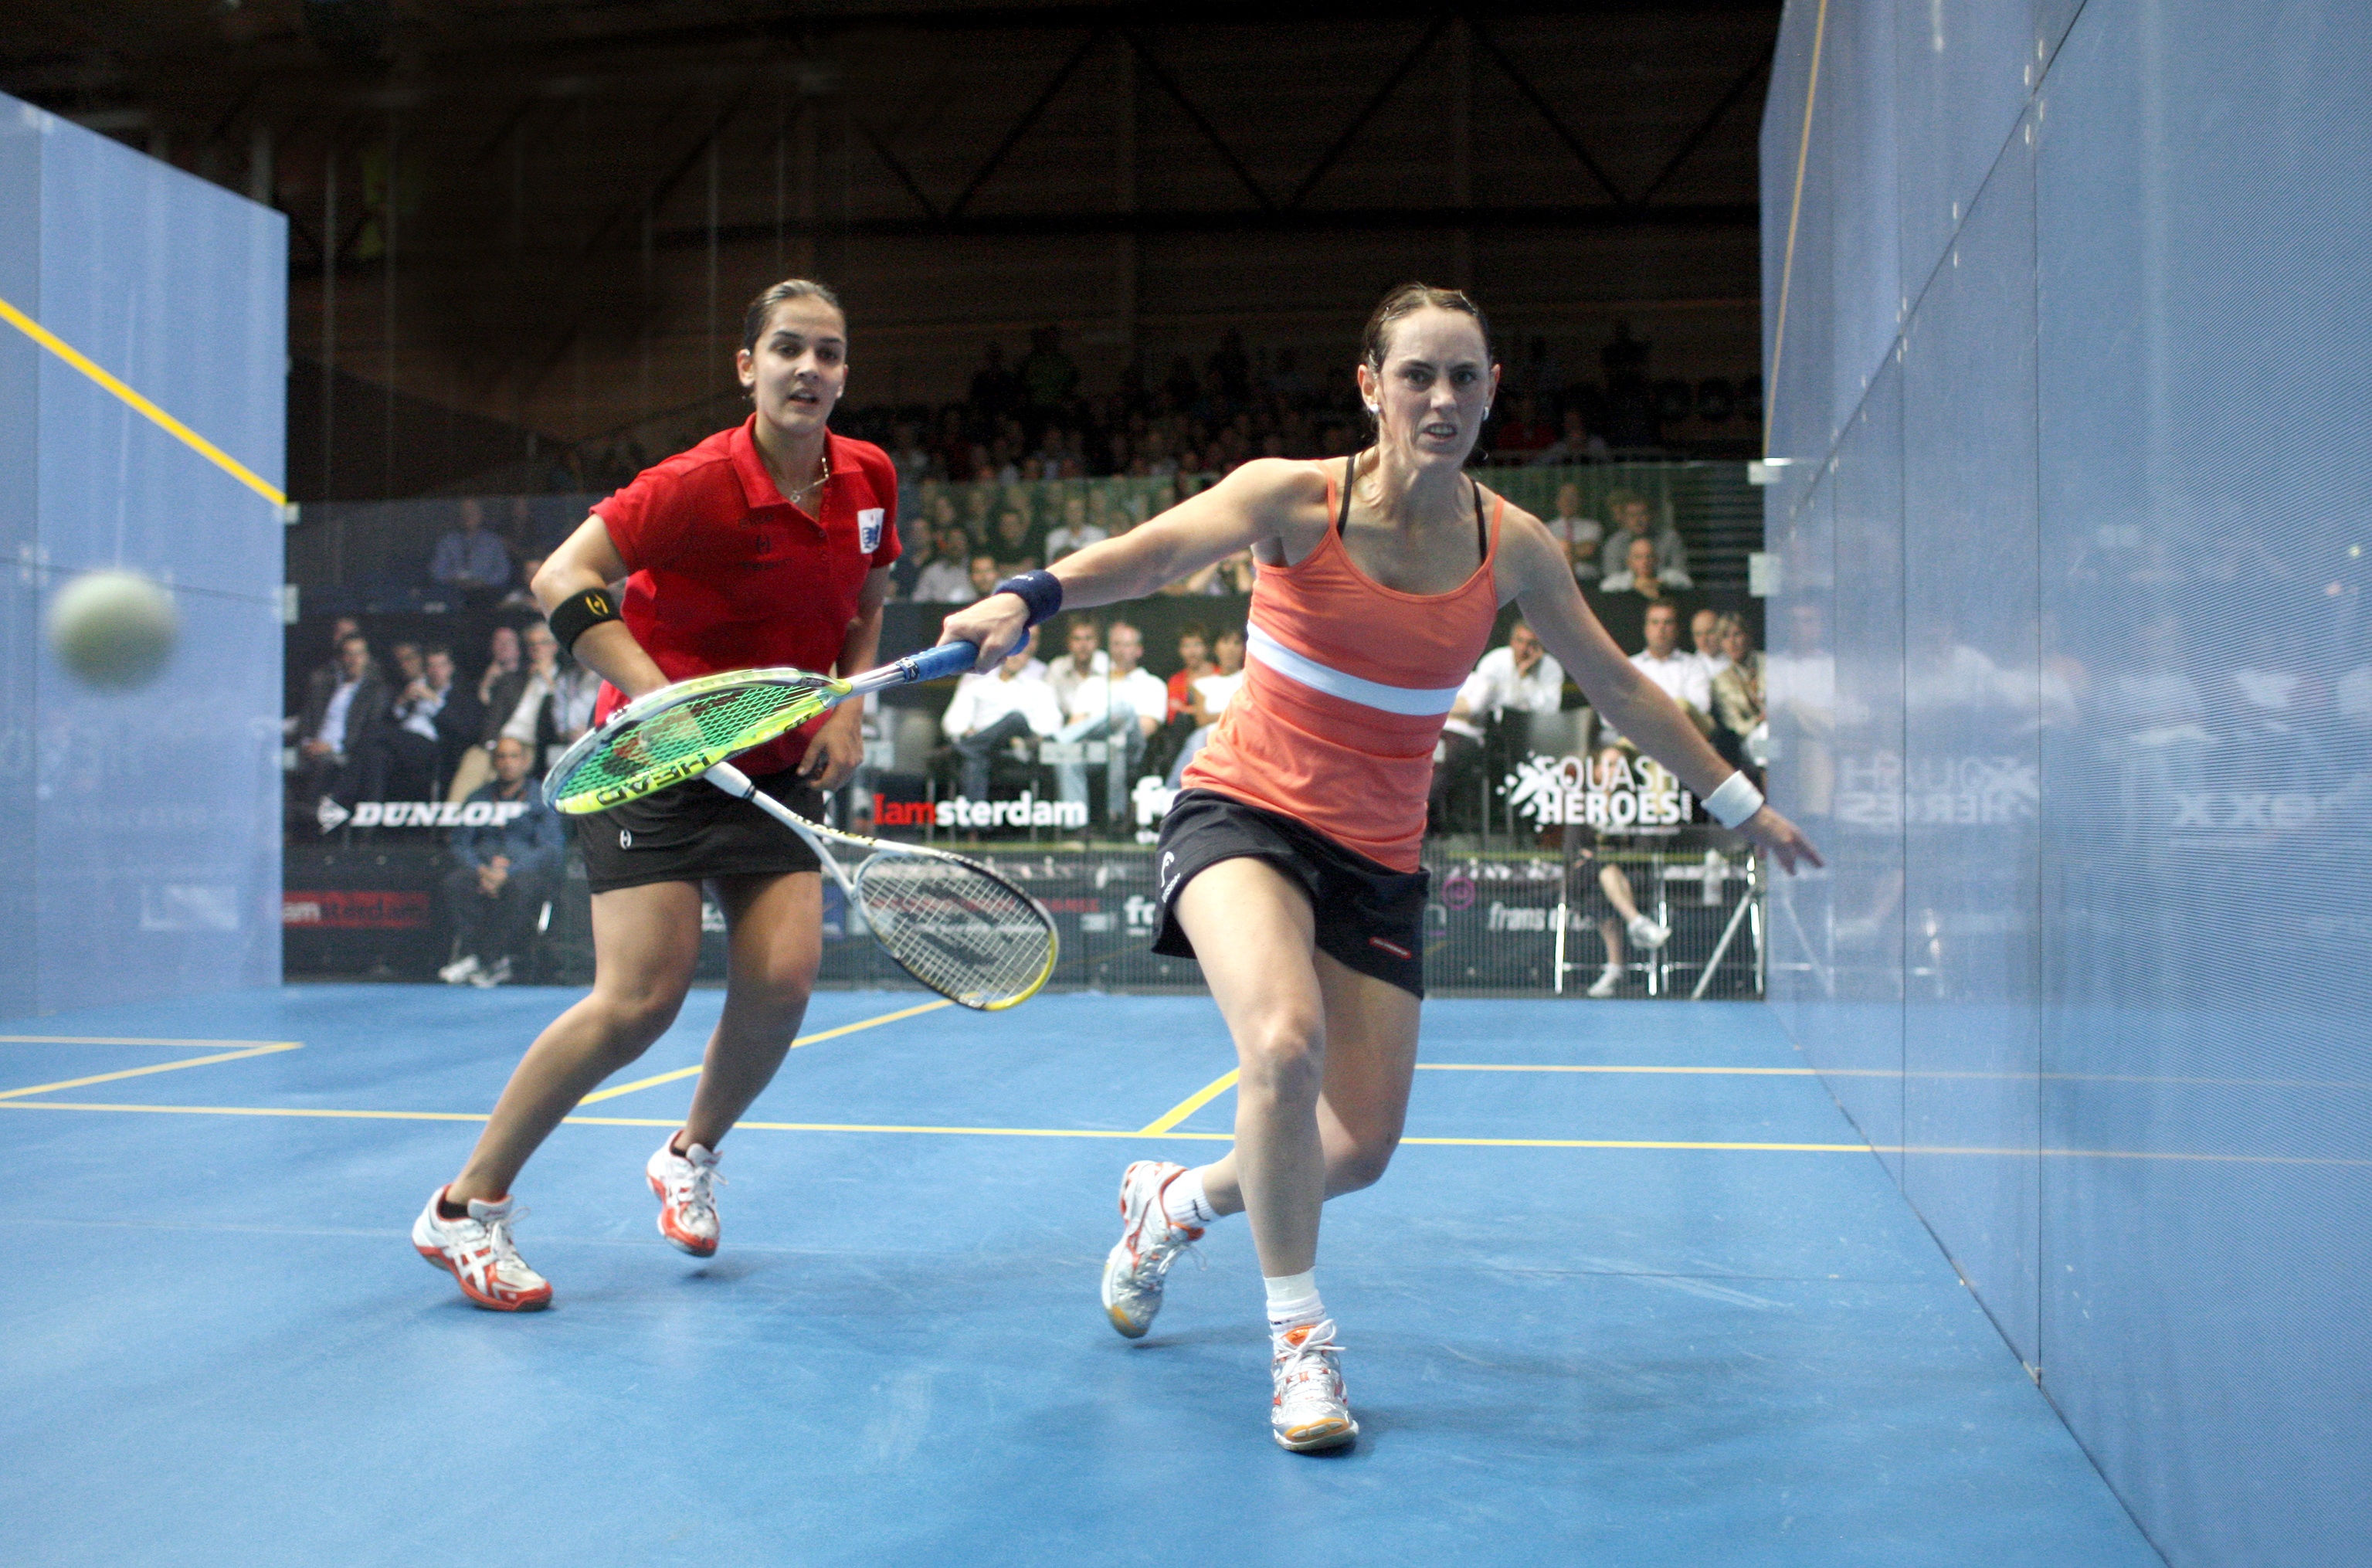 After dropping the first two games, Rachael Grinham (R) stormed back to beat Egypt’s Omneya  Abdel Kawy in the quarterfinals, 11-1, 11-6, 11-8.